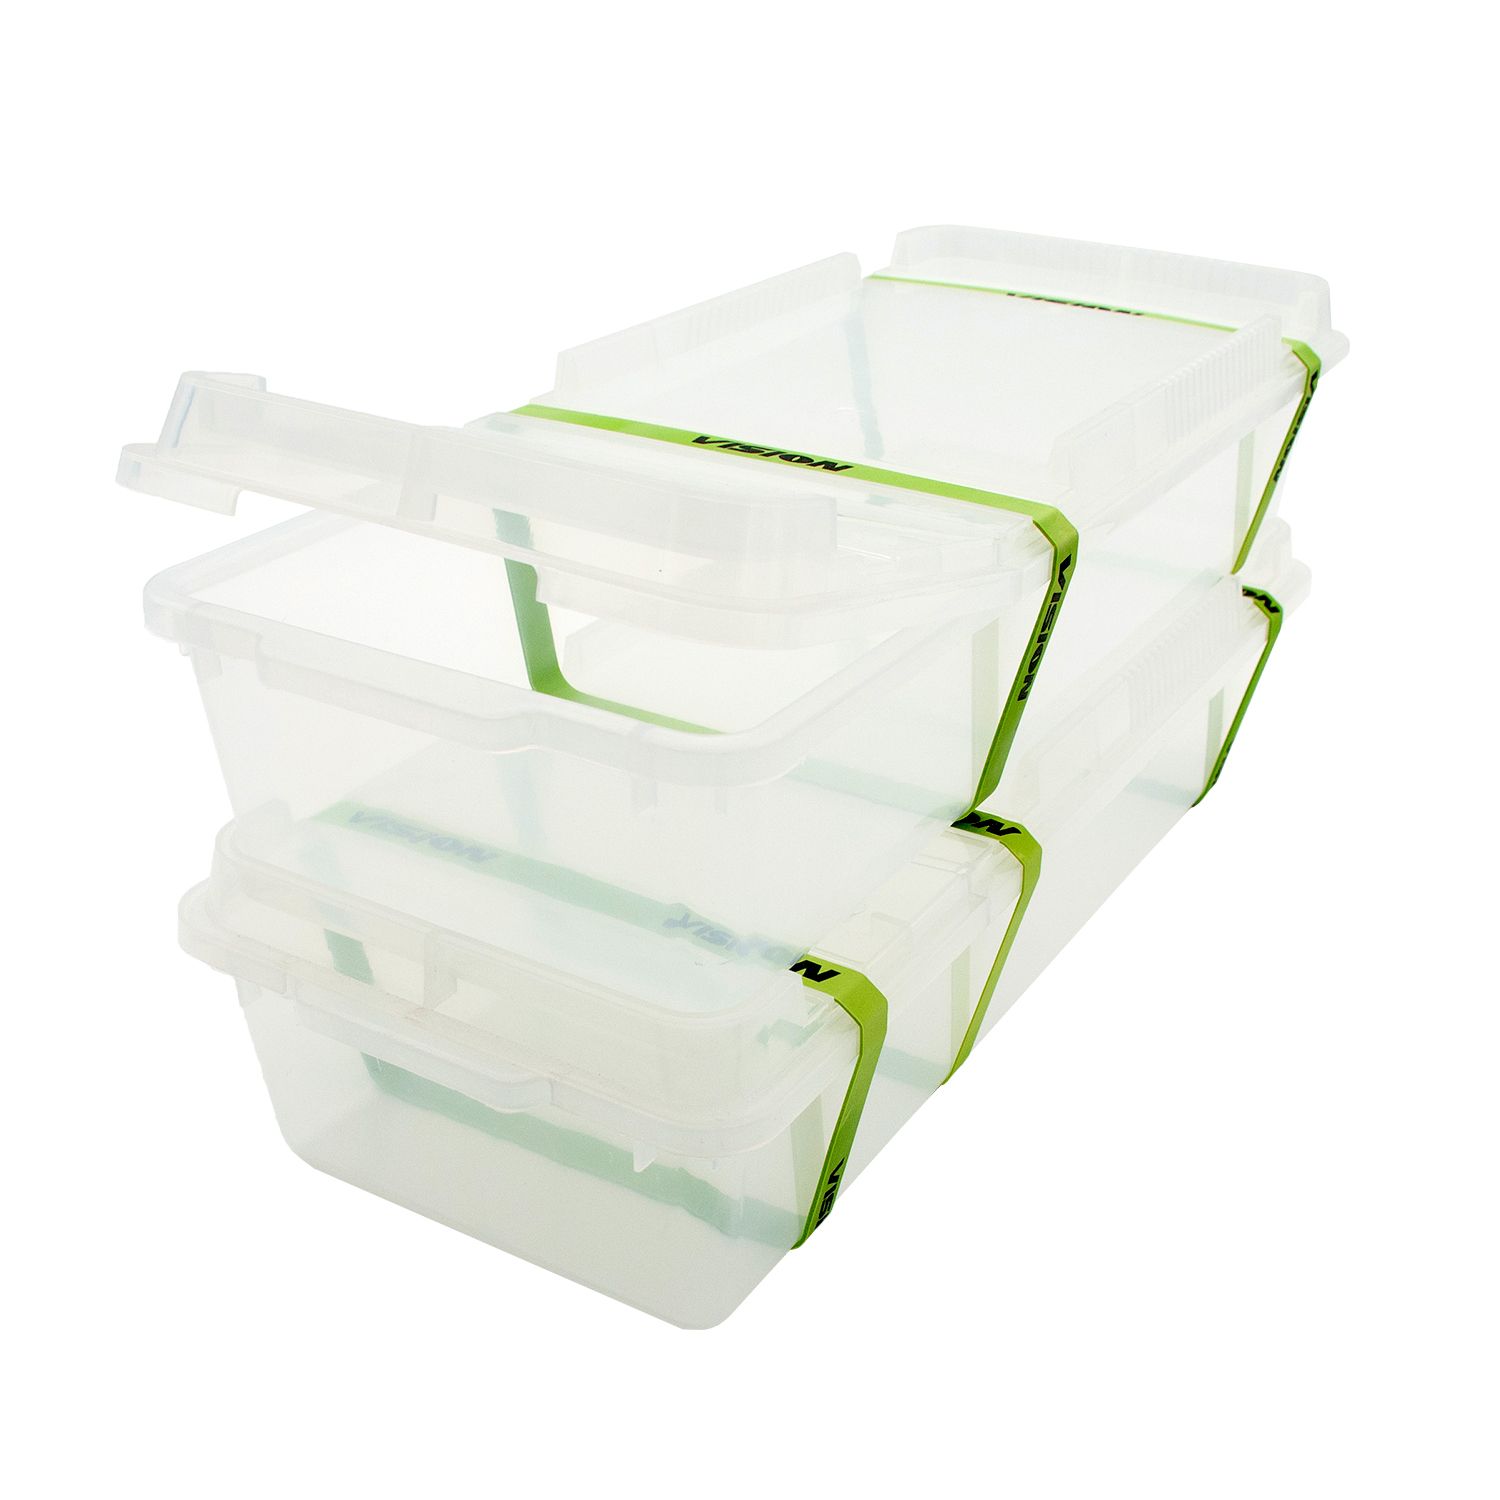 https://www.visionproducts.us/wp-content/uploads/2023/04/V18_2_clear_open_lids_bands_45_c.jpg